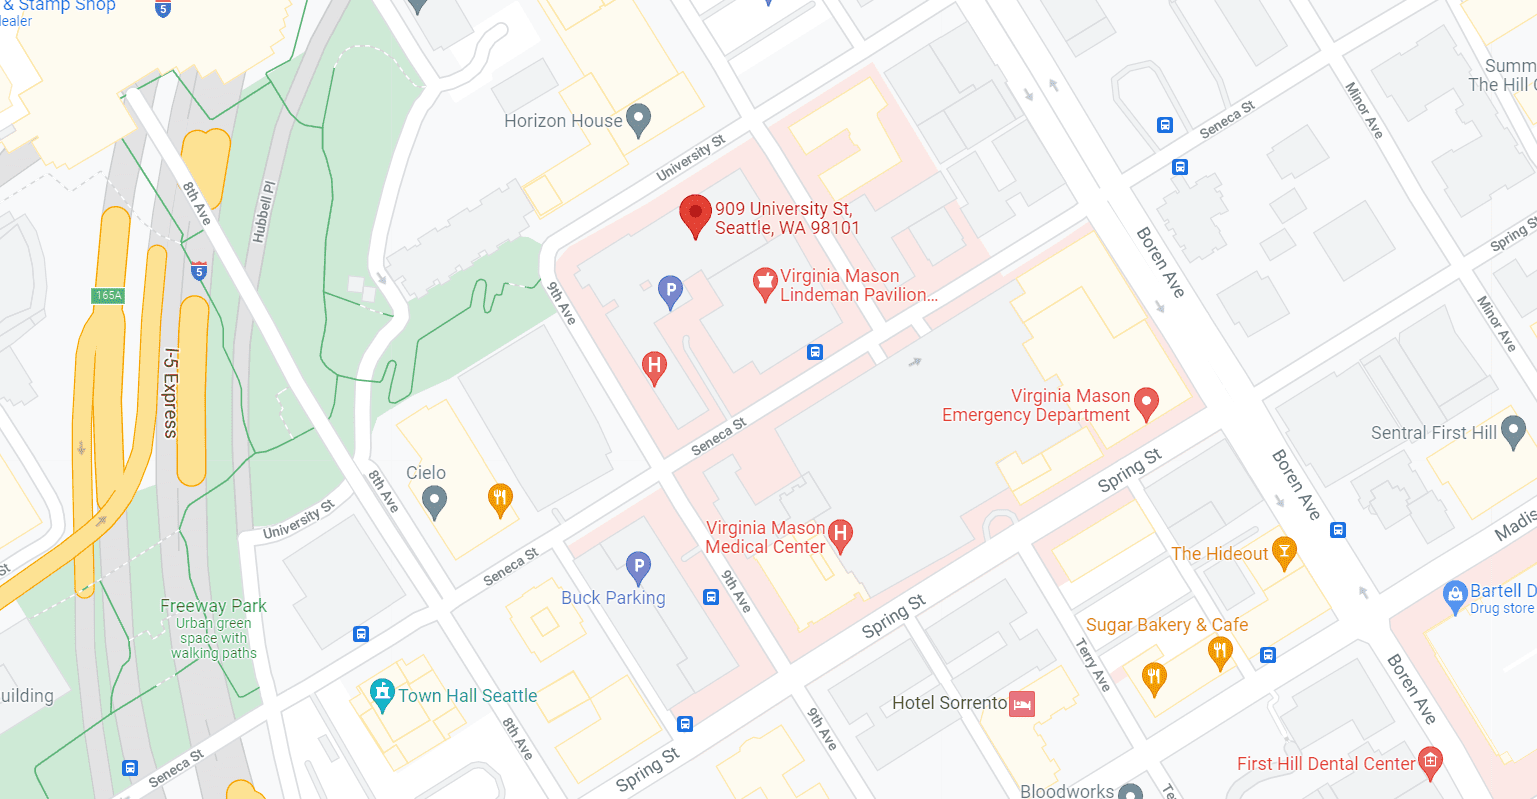 Google Maps image showing the location of the COVID-19 vaccination clinic at Virginia Mason in Seattle, WA.